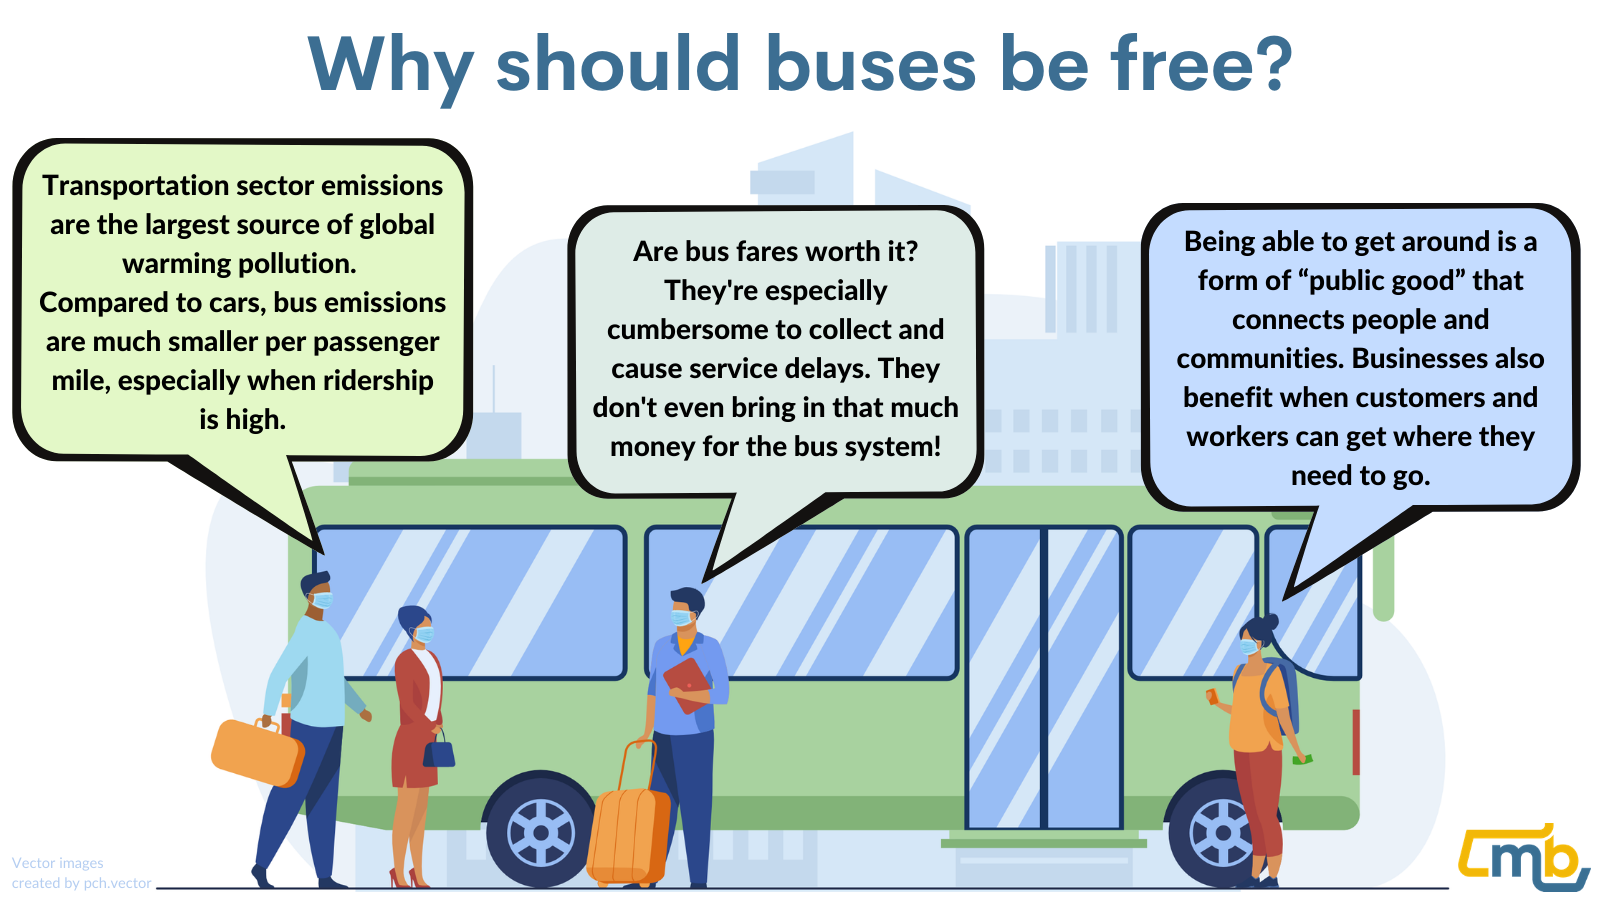 Why should buses be free?